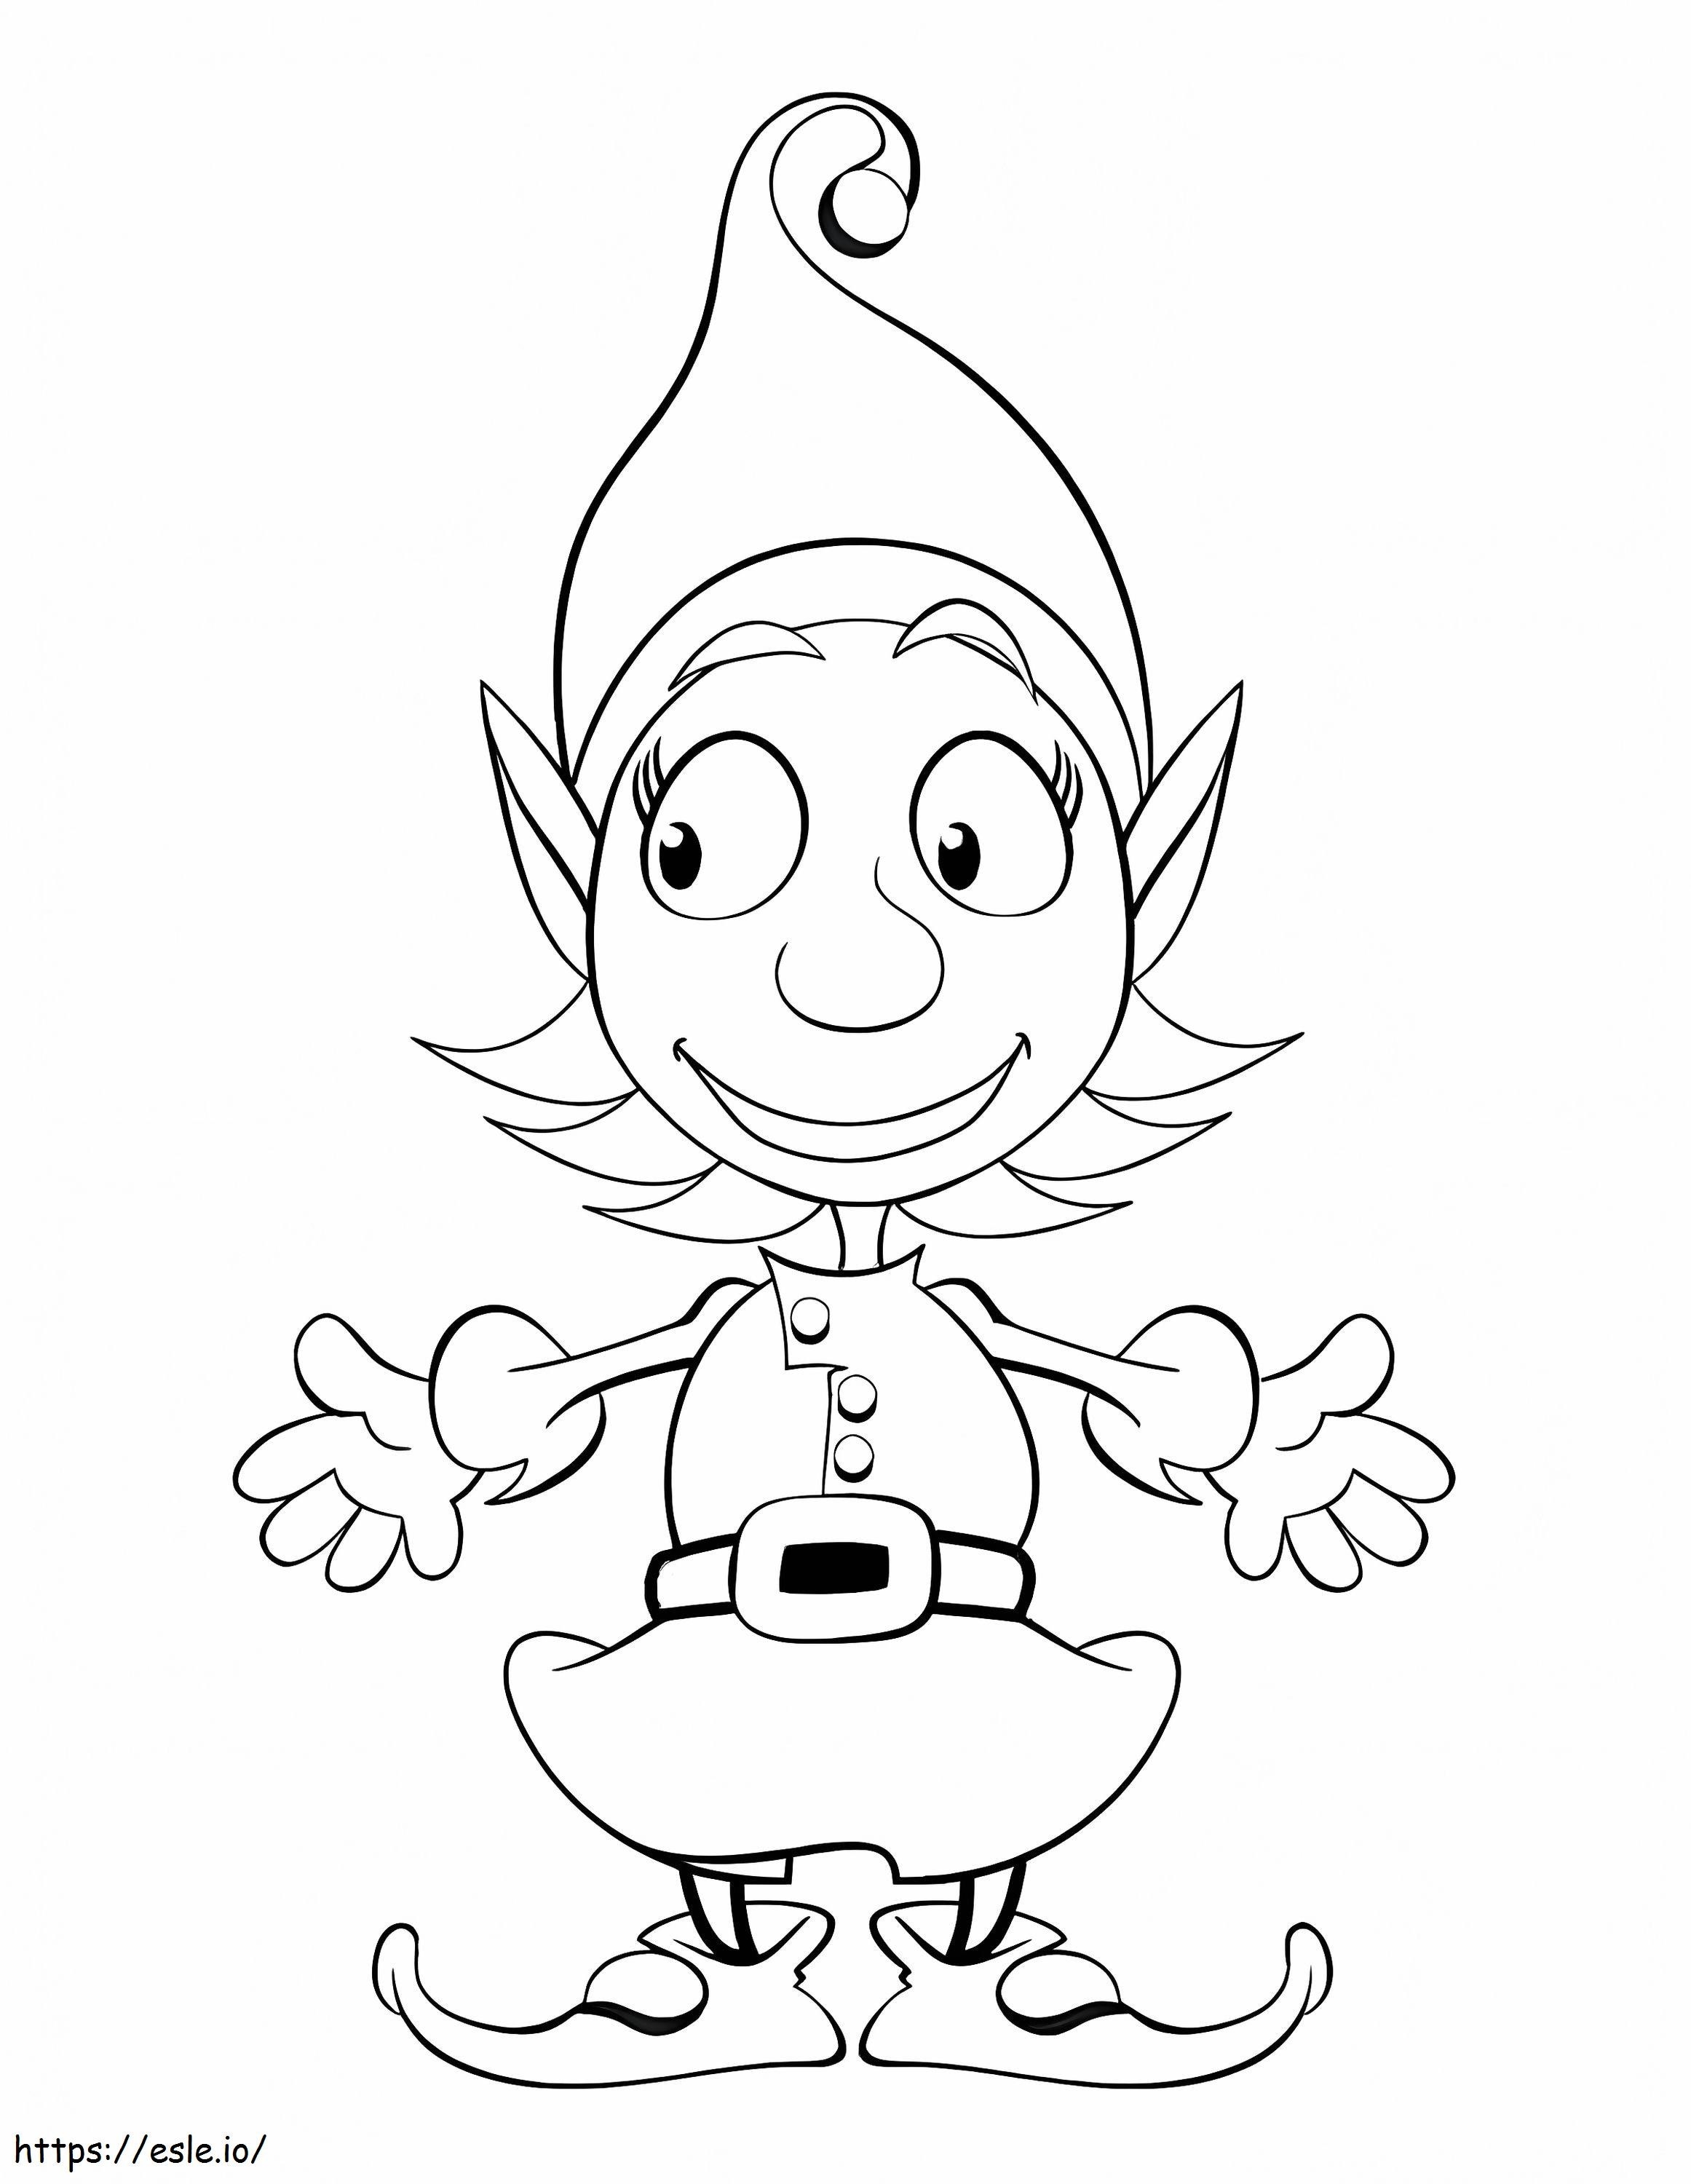 Elf With Happy Smiles coloring page